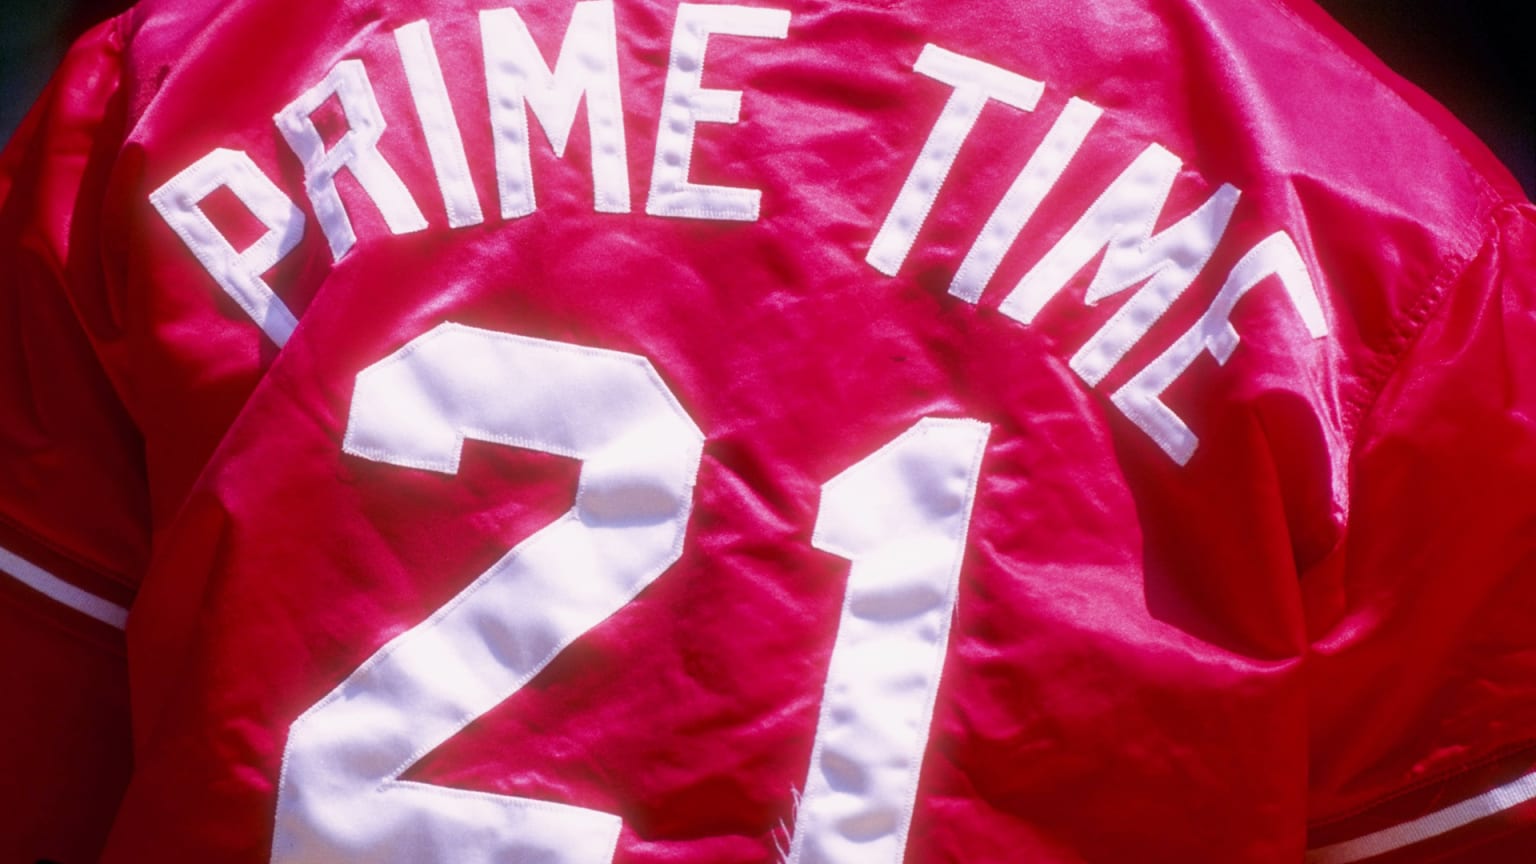 The words Prime Time and the number 21 are shown on the back of Deion Sanders' jersey